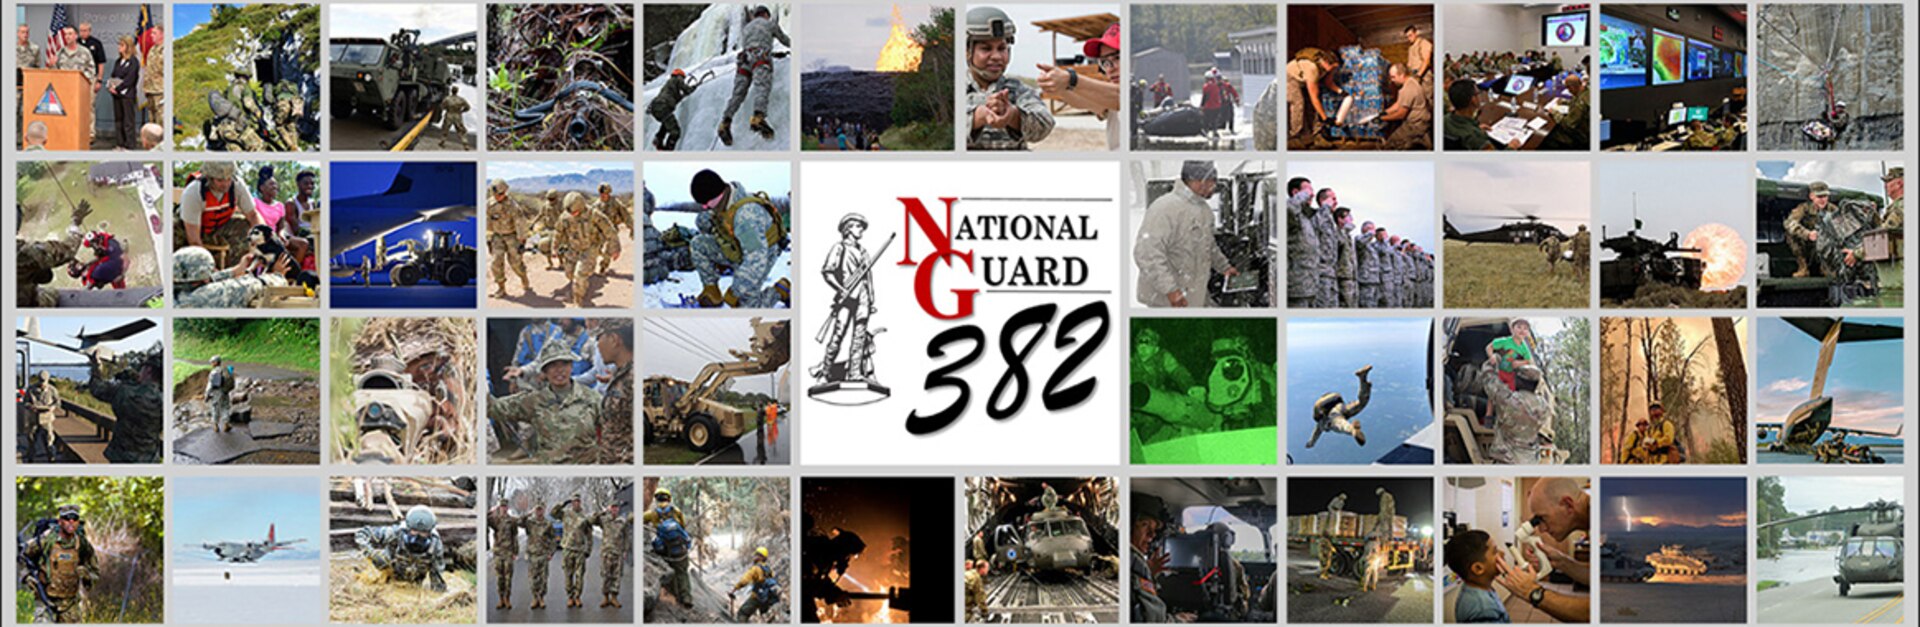 The official birth date of the Army National Guard as a reserve component of the Army is December 13, 1636. On this date, the Massachusetts colonial legislature directed that the colony’s existing militia companies be organized into three regiments. This date is recognized based upon the Department of Defense’s practice of adopting the dates of initial authorizing legislation for organized units as the birthdates of the active and reserve components of the armed services.